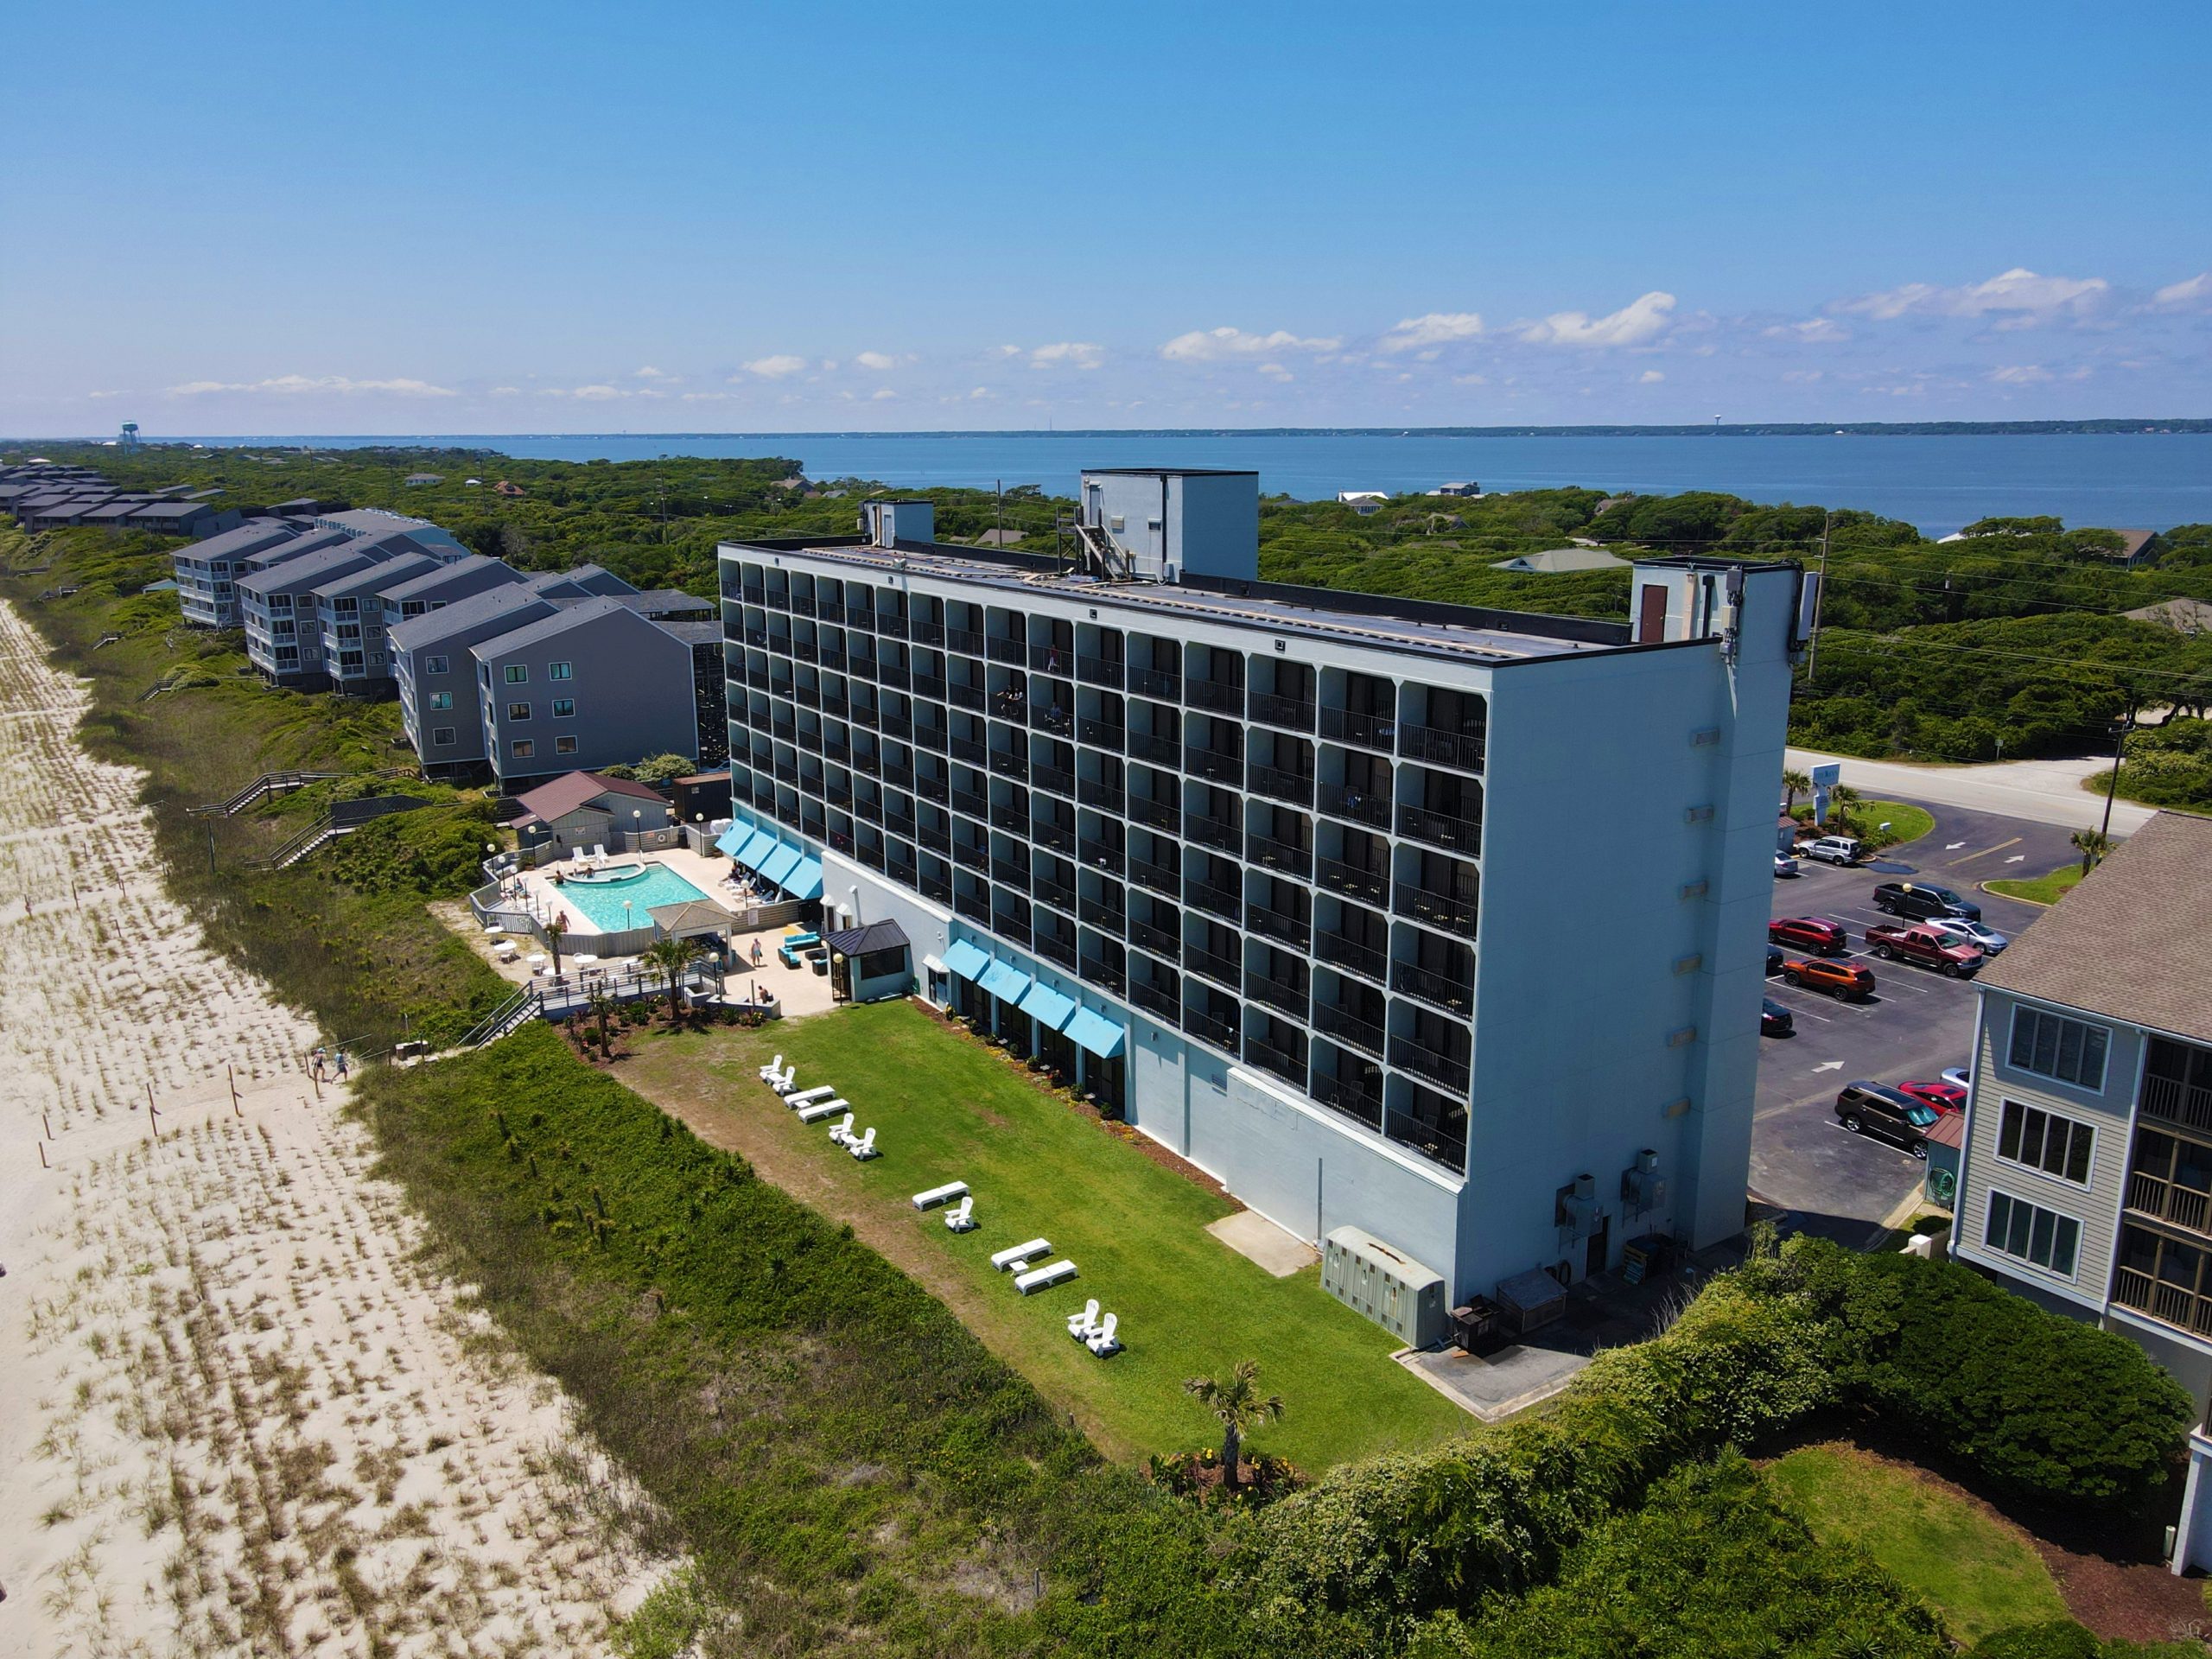 Maryland-Based Resort Development and Management Company Buys The Inn at Pine Knoll Shores for $18 Million